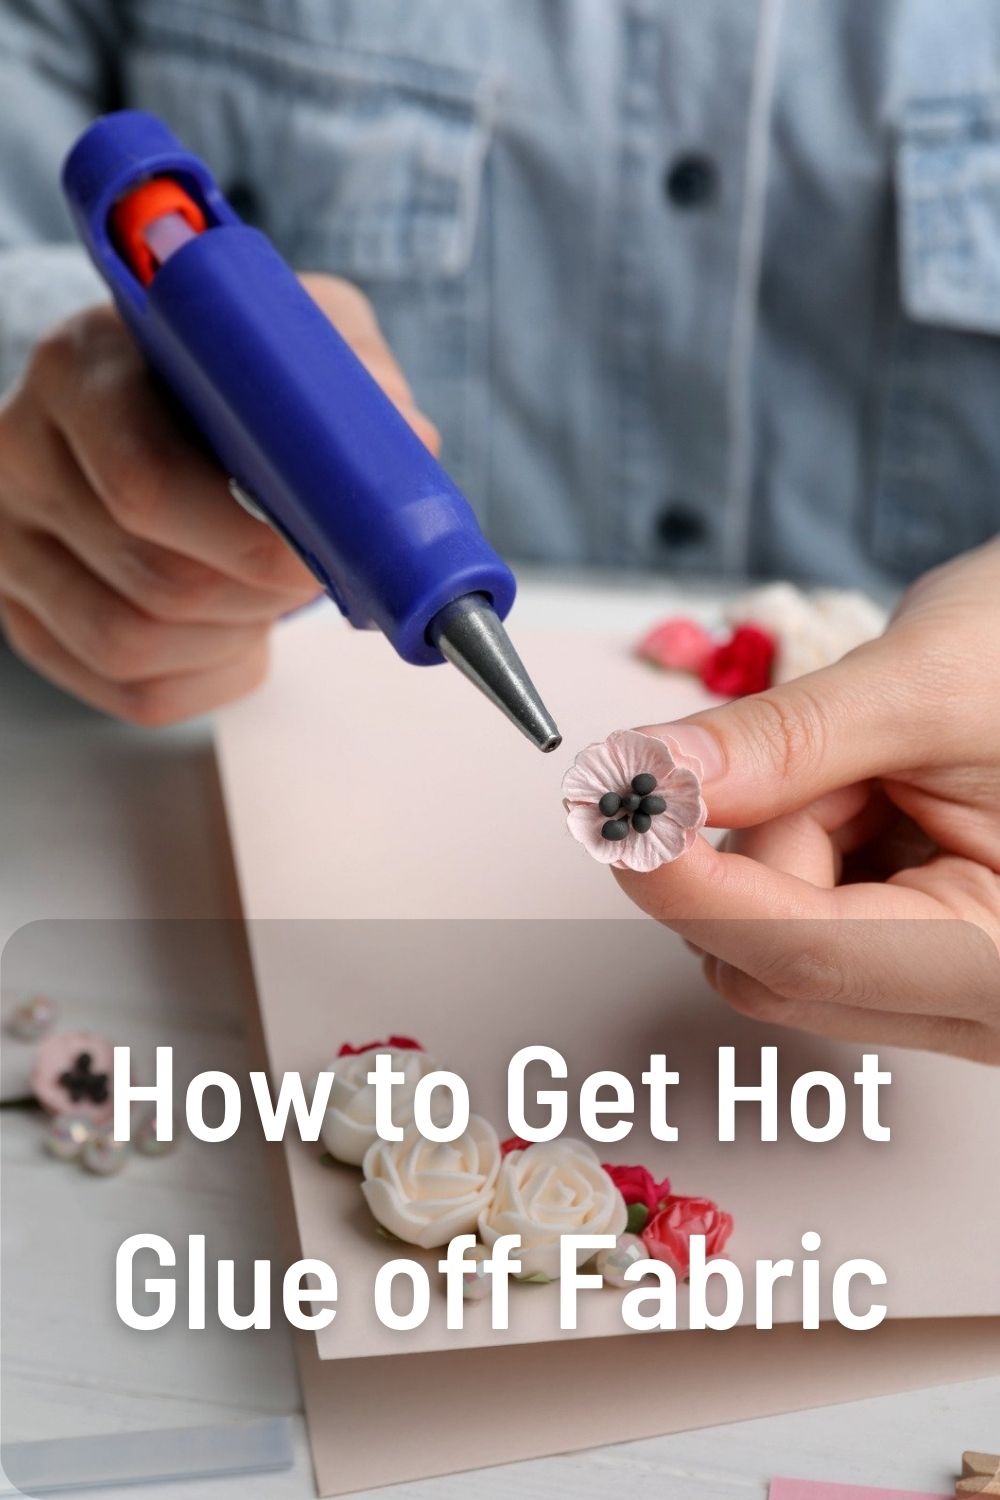 How to Get Hot Glue off Fabric